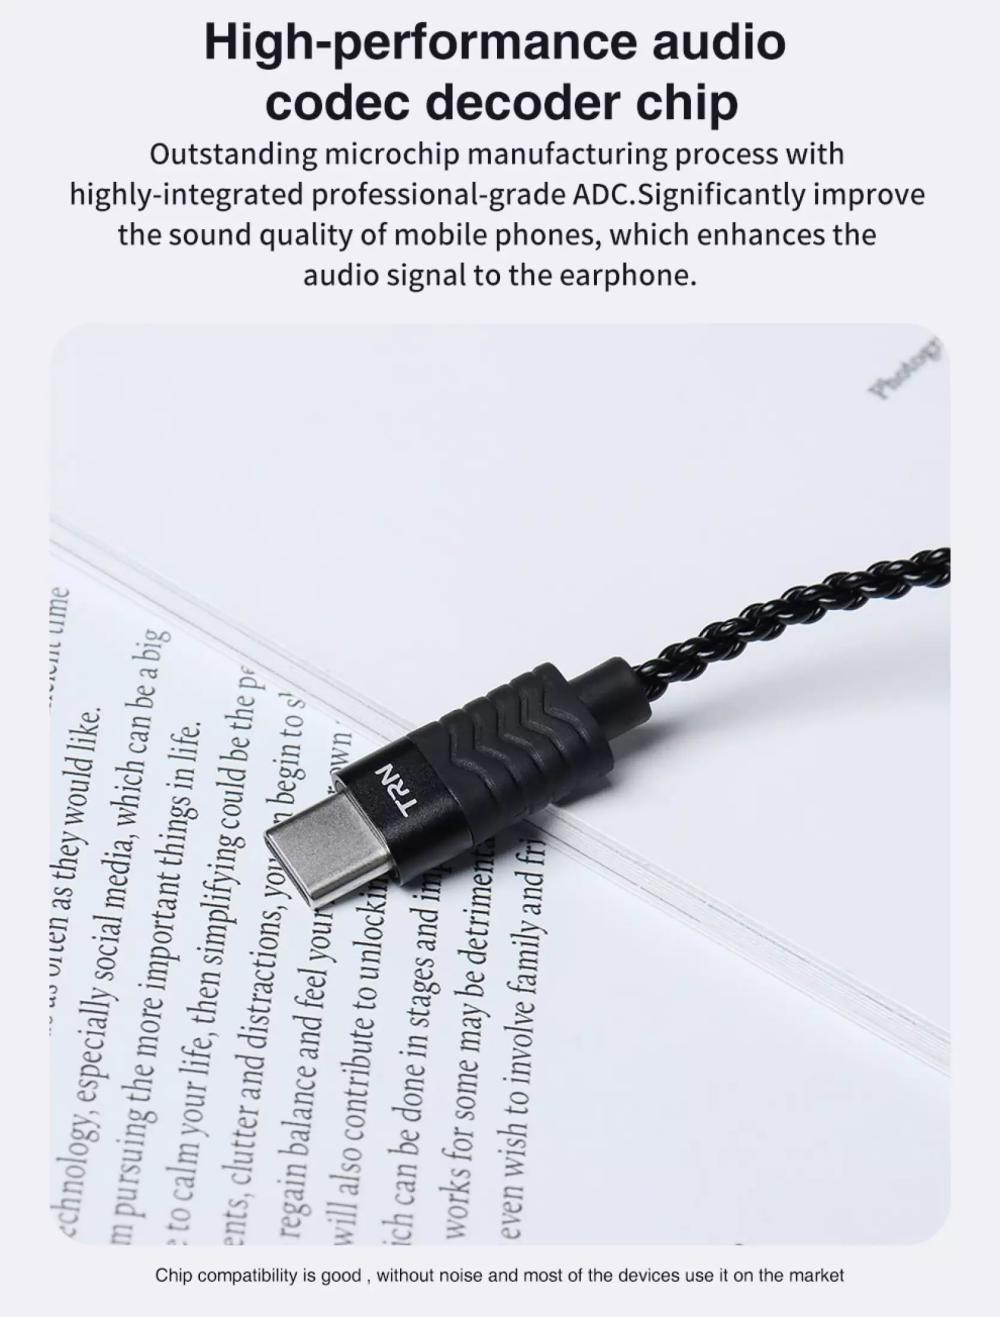 TRN Type C Earphones Cable with Mic